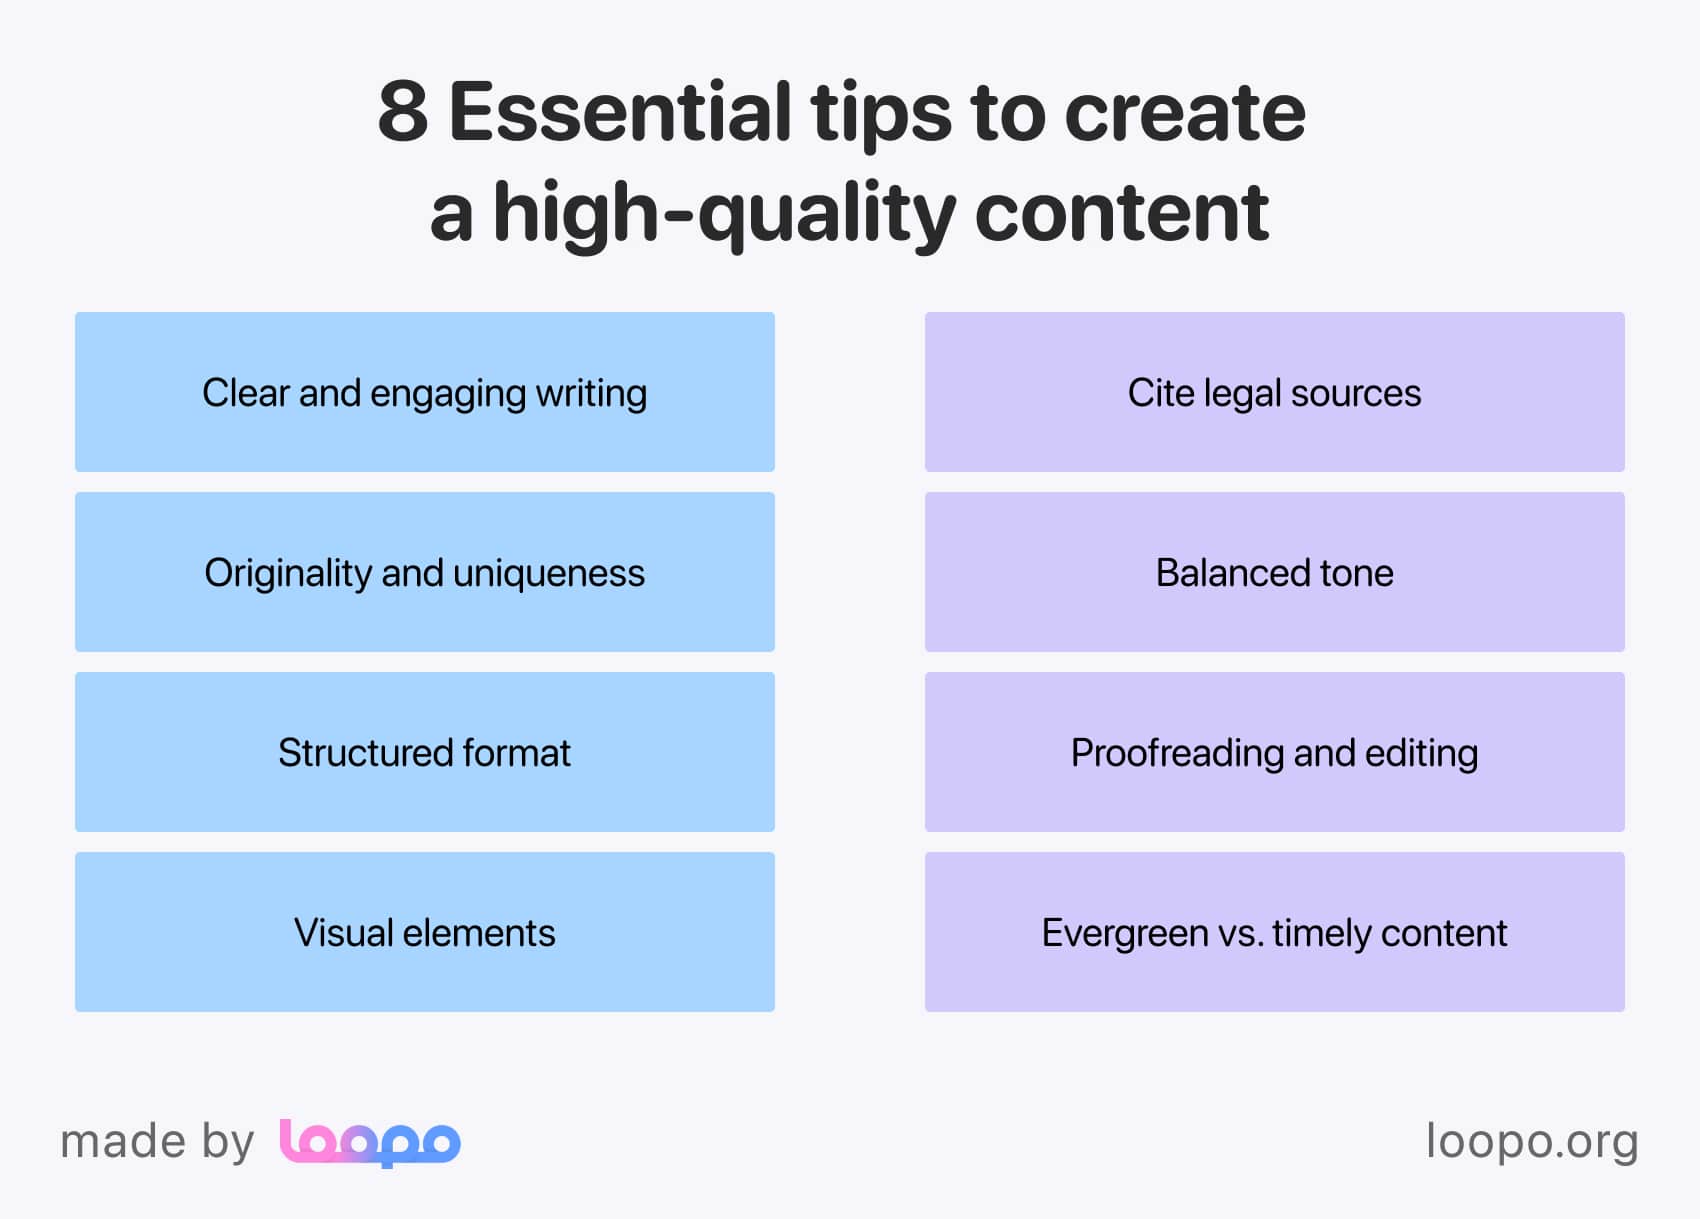 Ideas to create high-quality content from Loopo team